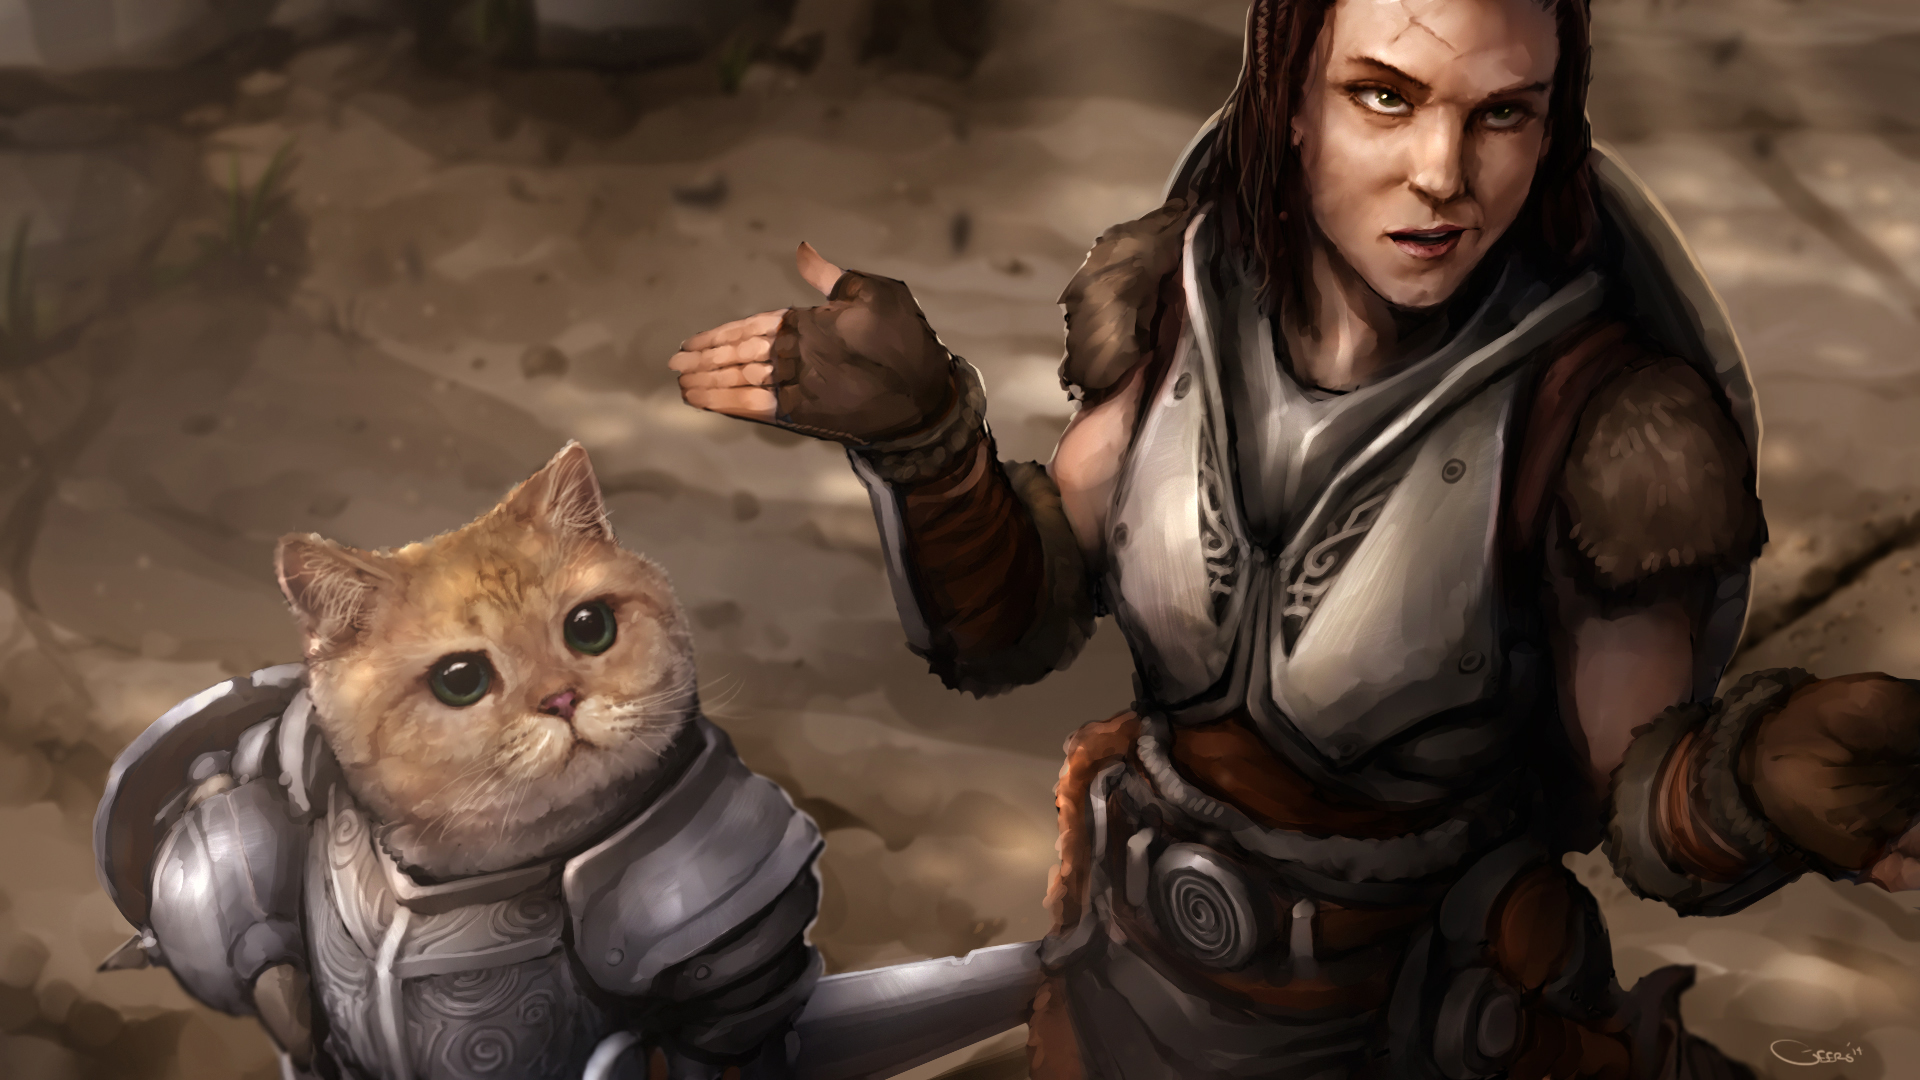 lydia_cat_by_darrengeers-d71dqmd.jpg